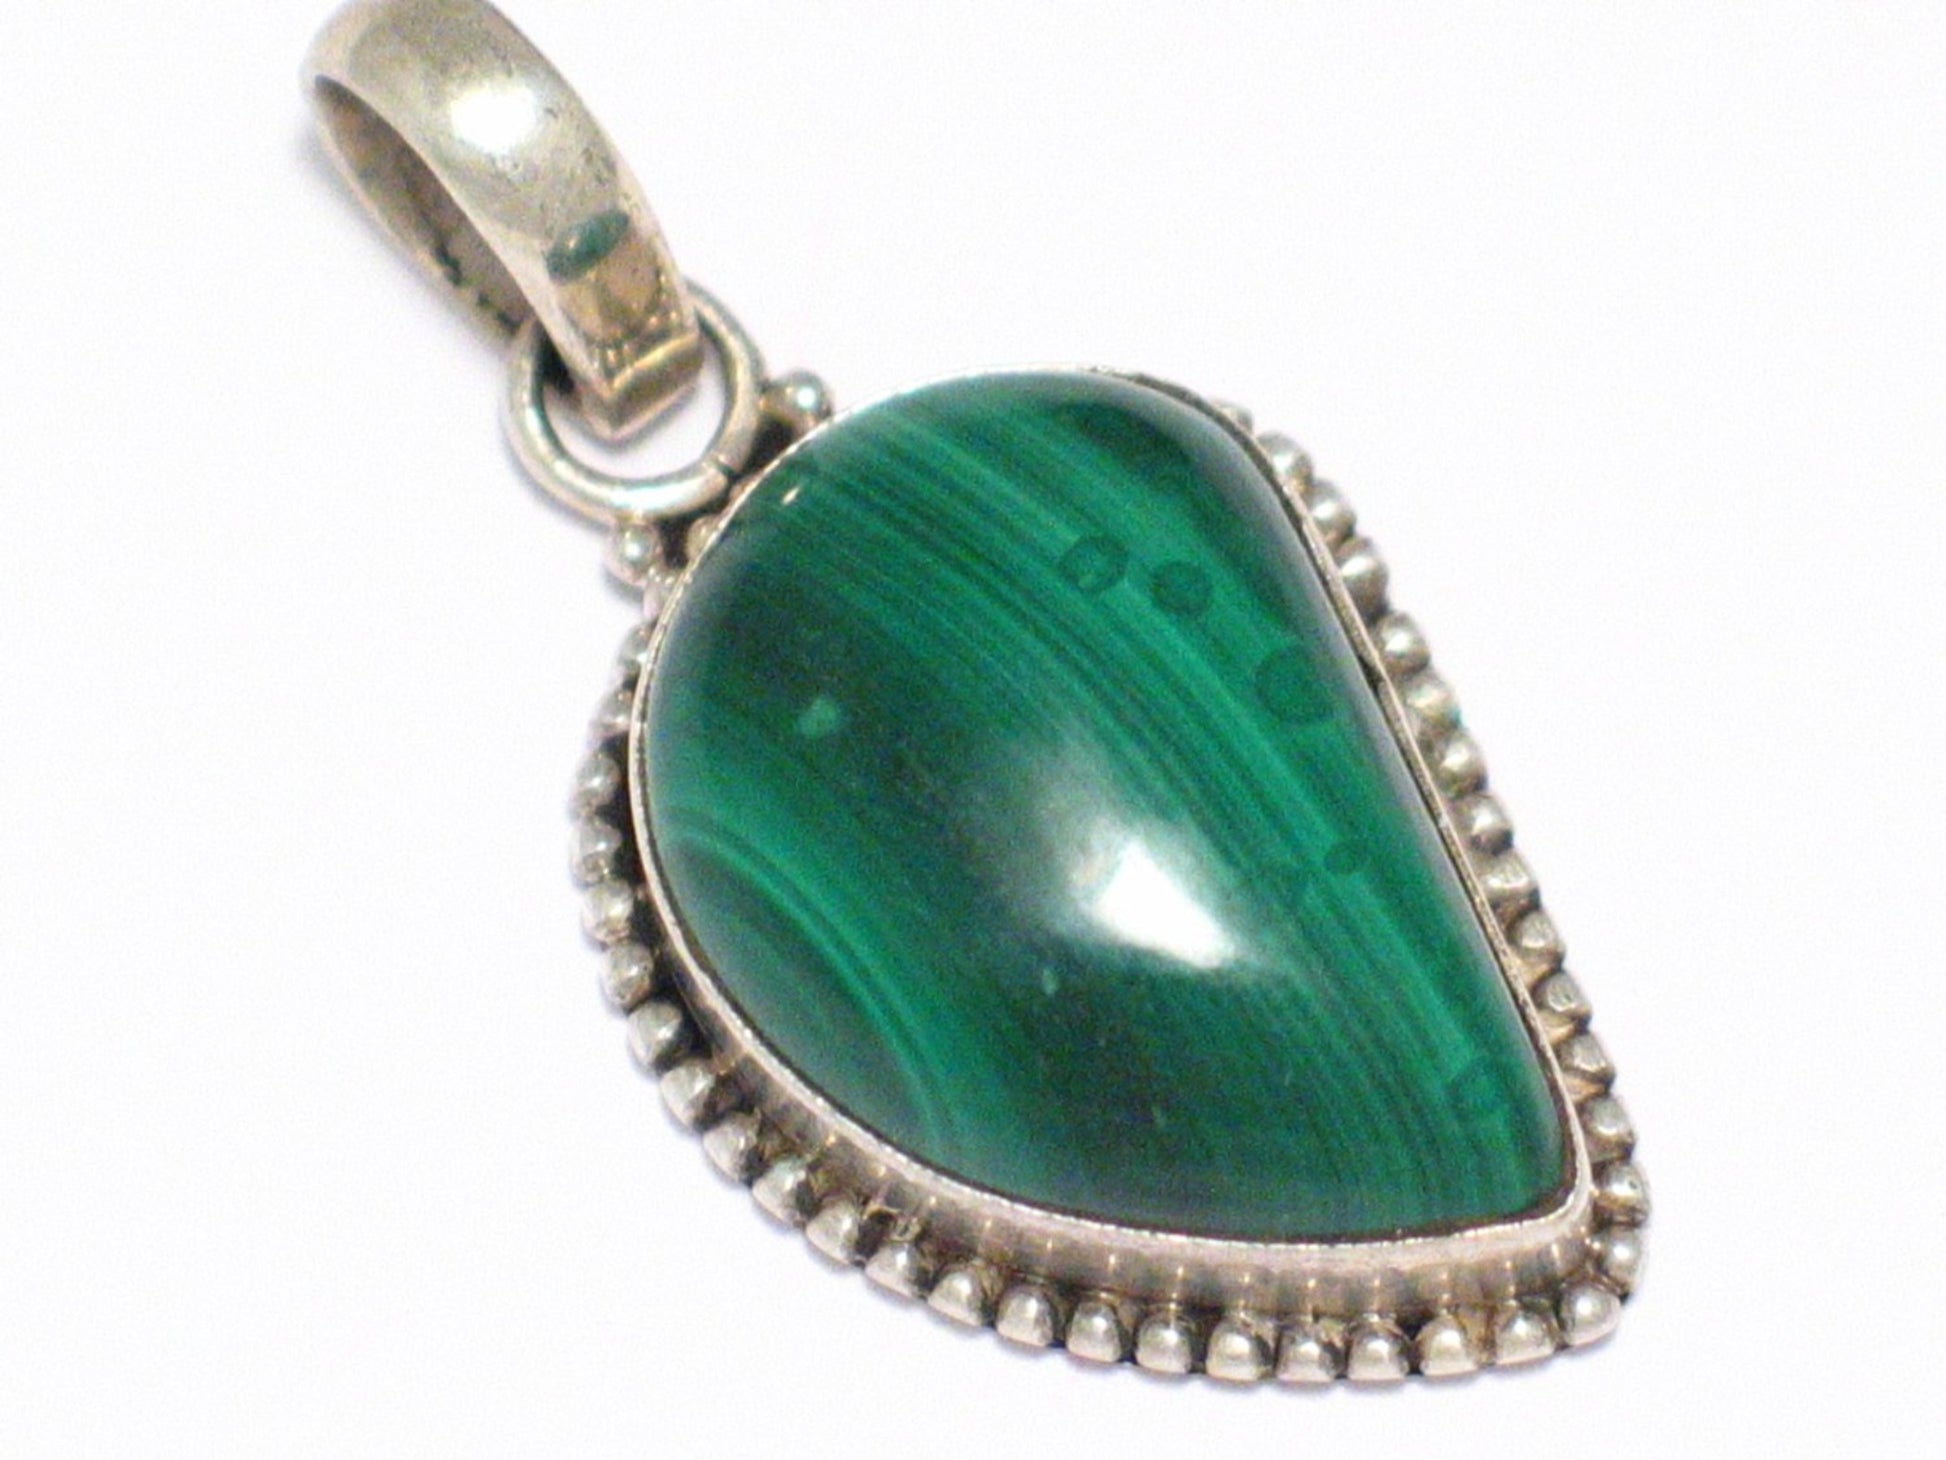 Silver Pendants | Sterling Silver Green Malachite Stone Pendant | Discount Jewelry online at Blingschlingers Jewelry